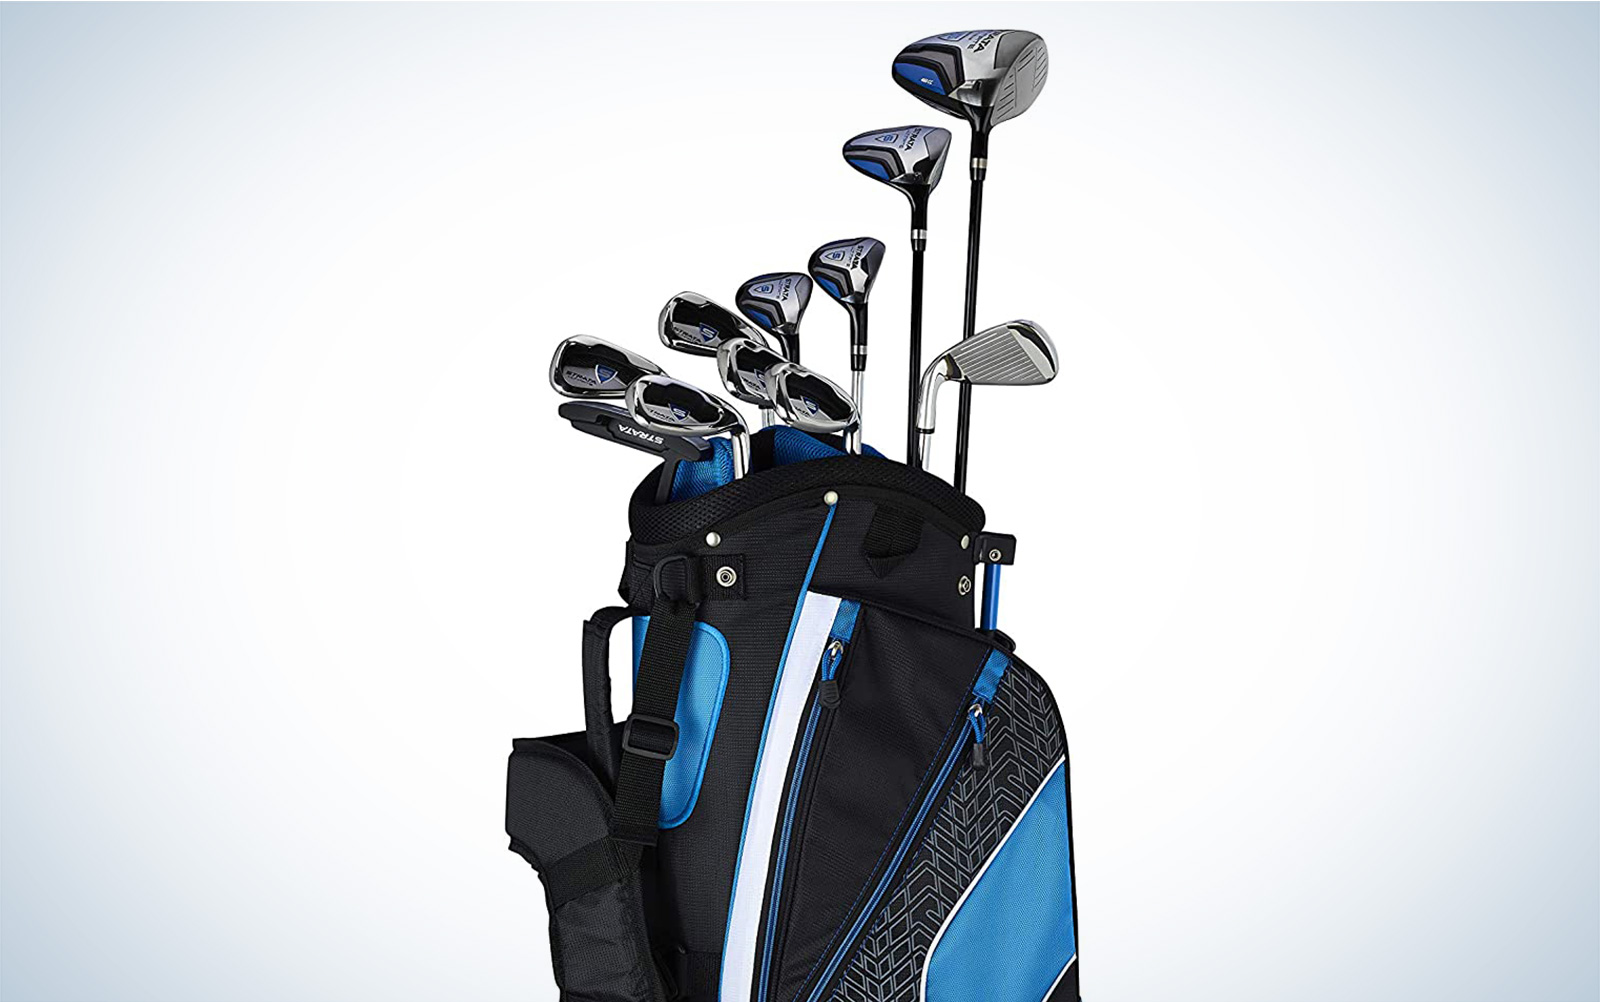 Callaway Strata Men's Golf Clubs on sale for Amazon Prime Day